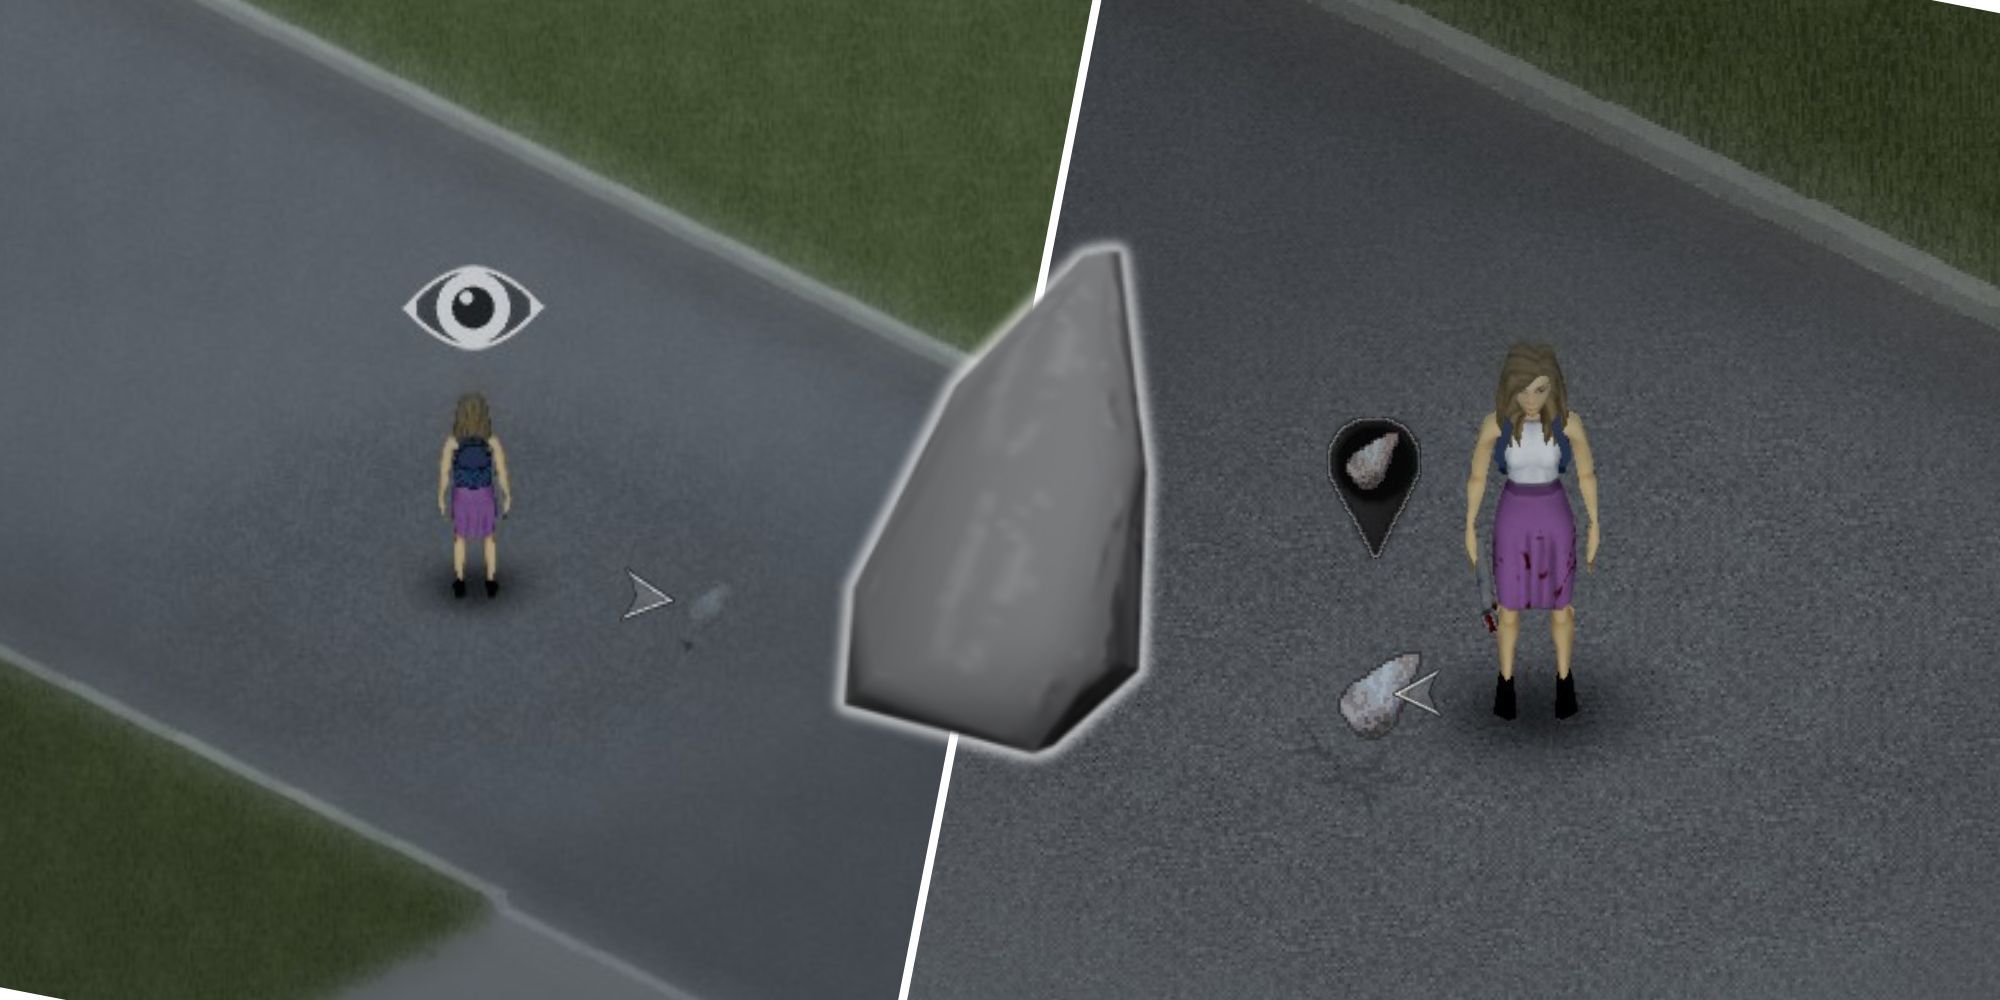 Split image of Project Zomboid showing a player with Chipped Stone